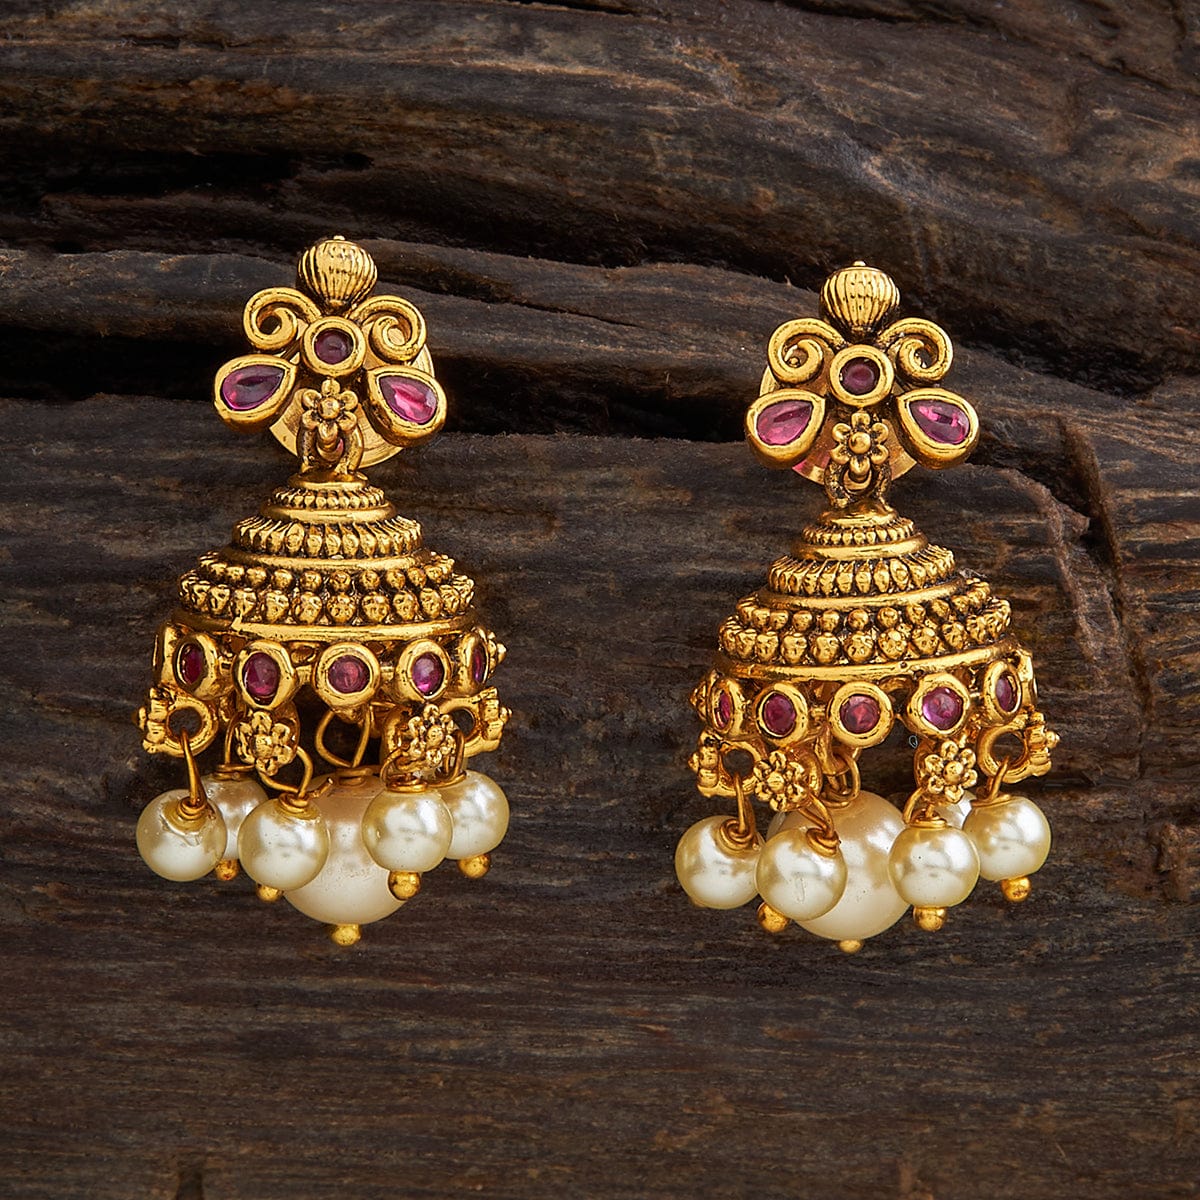 Kushal's Fashion Jewellery - Traditional earrings crafted with antique  sugar pearls designed delicately. Shop this unique pair of traditional  earrings now. Design no. 119173 Shop here - https://www.kushals .com/collections/antique-earrings/products ...